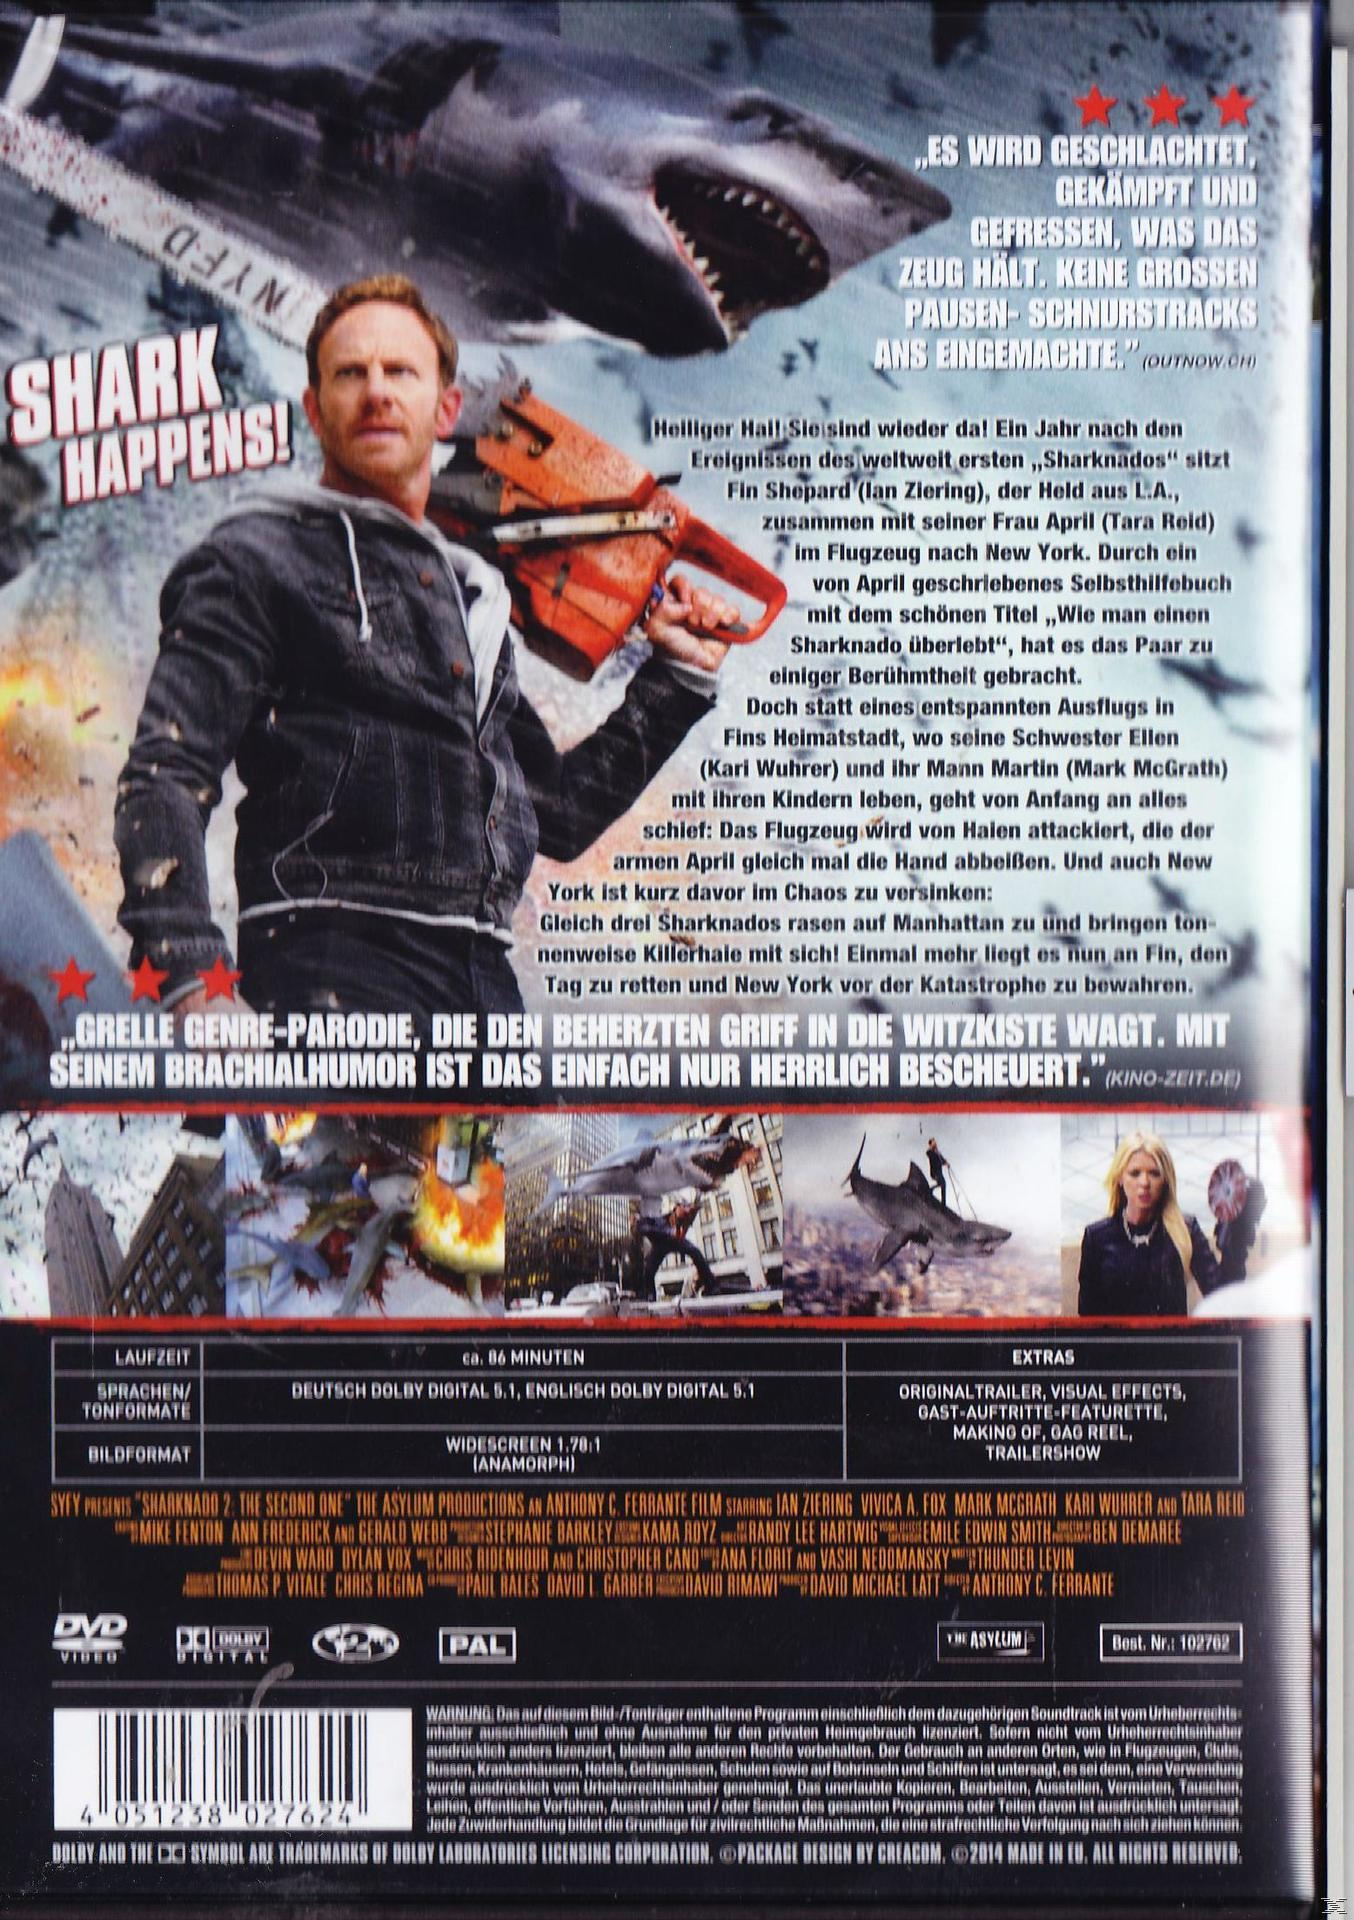 - Second DVD Sharknado One The 2